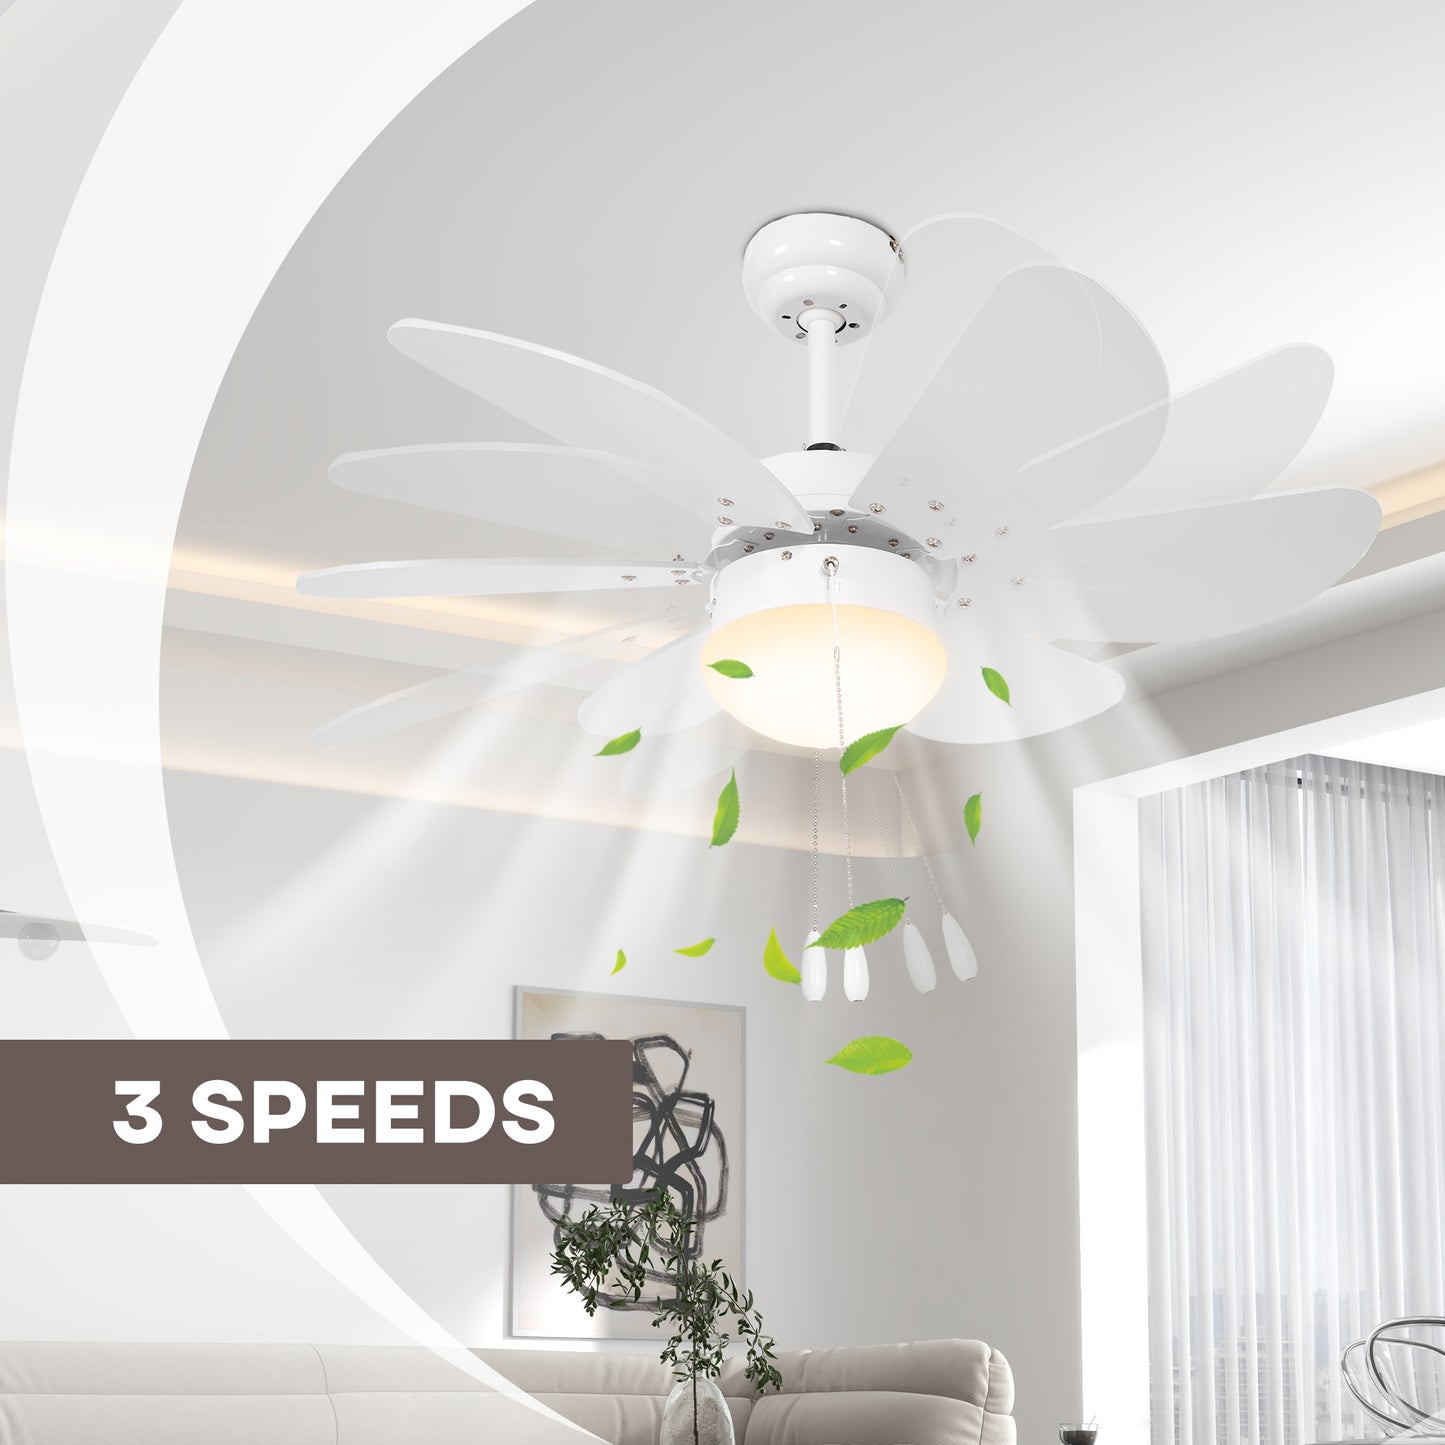 HOMCOM Ceiling Fan with LED Light, Flush Mount Ceiling Fan Lights with 6 Reversible Blades, Pull-chain Switch, White